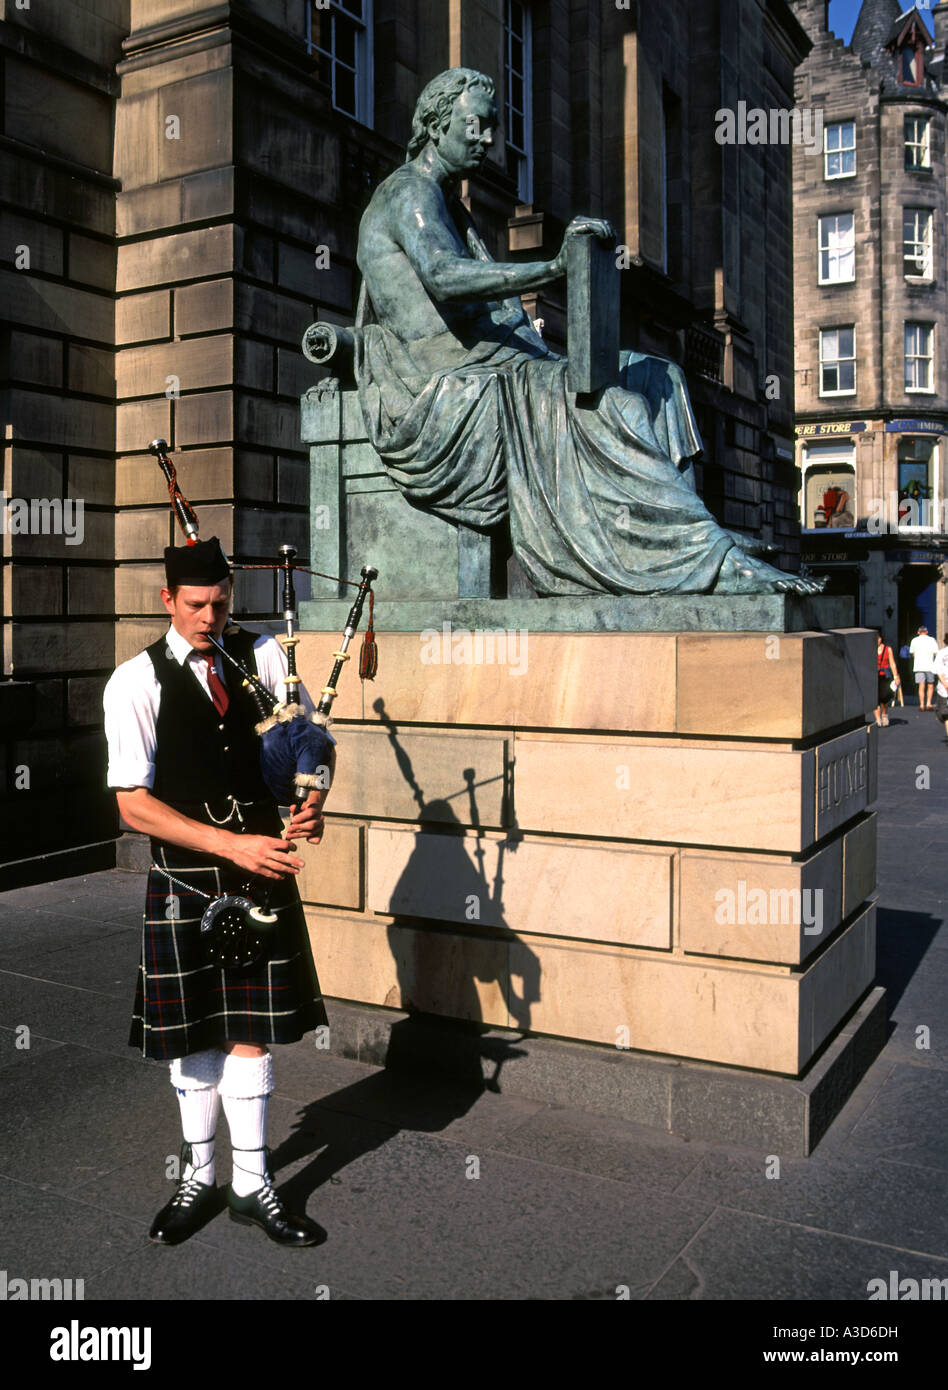 Man playing bagpipes beside statue of David Hume (by sculptor Alexander Stoddart) outside High Court of Justiciary in Edinburgh Scotland UK Stock Photo